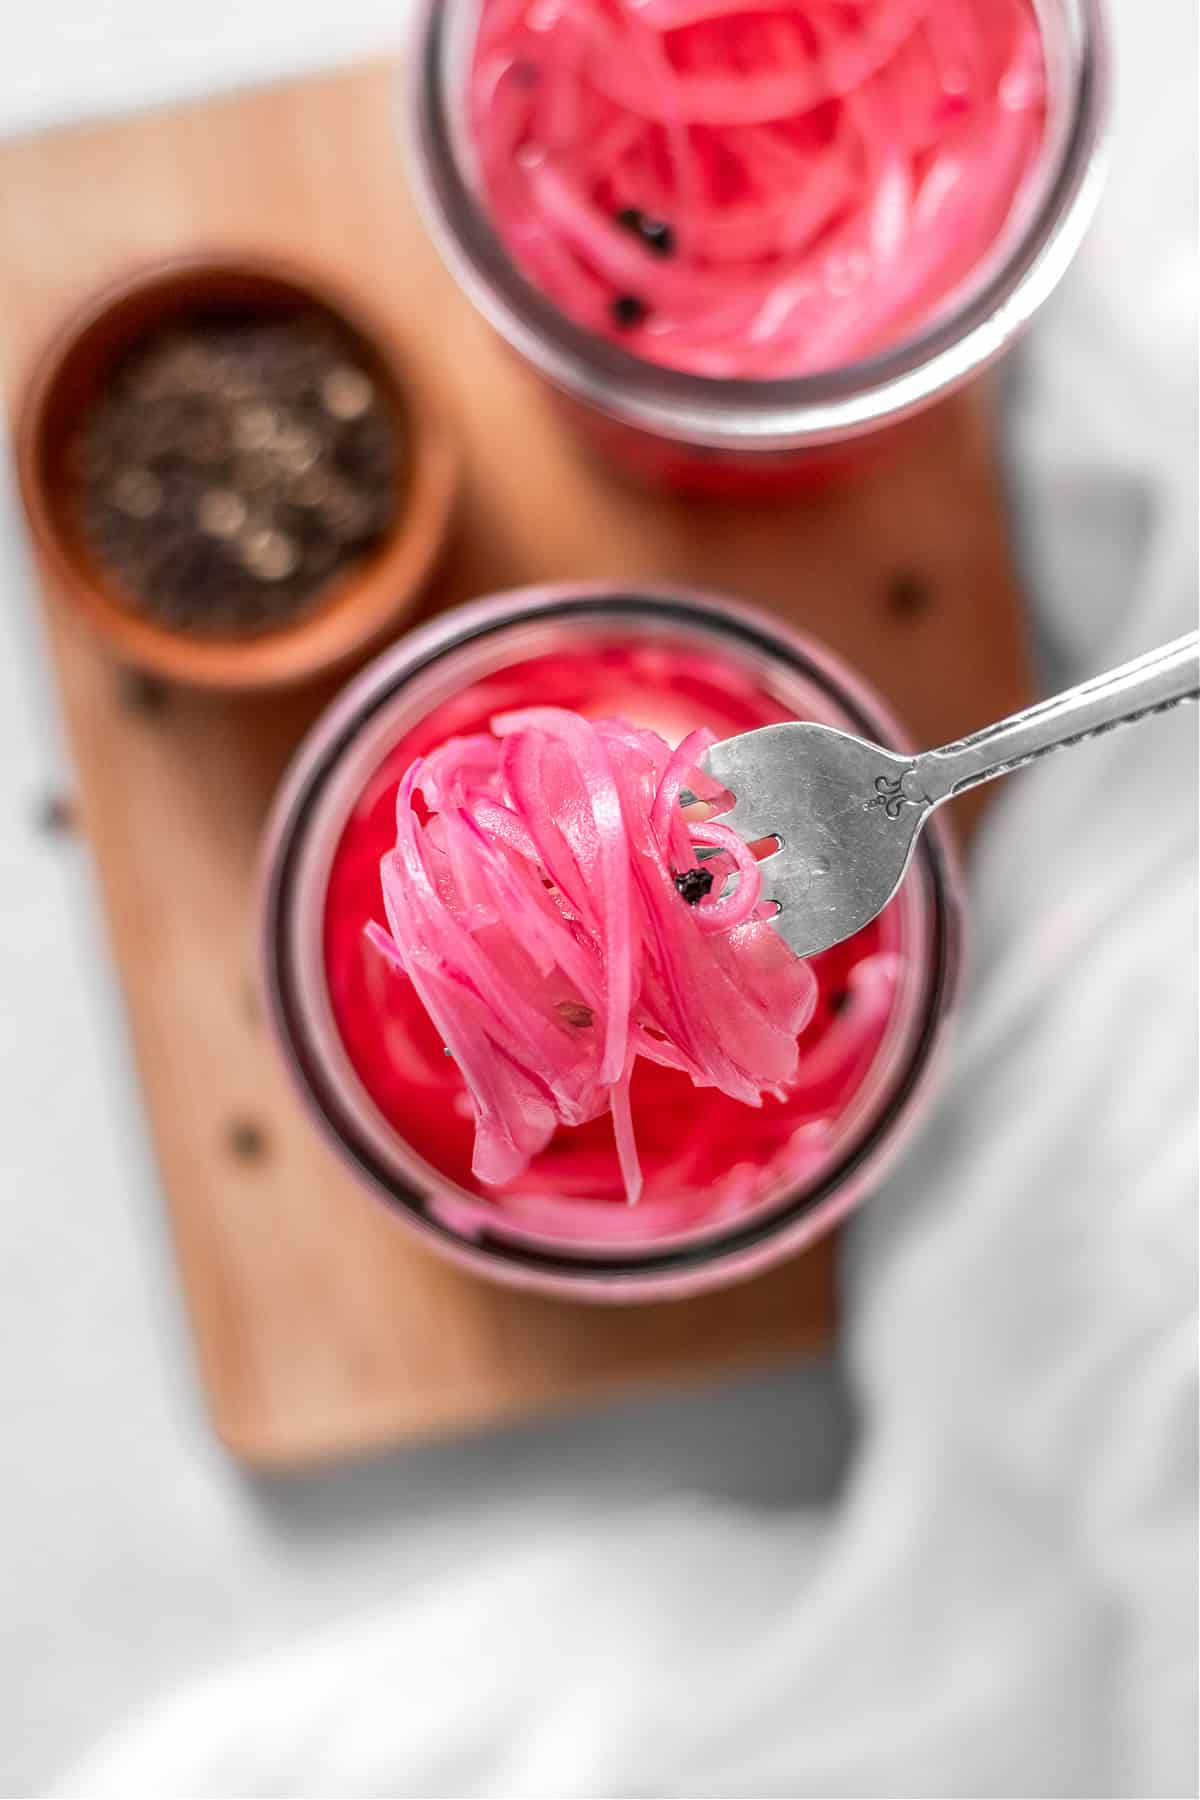 Add a tangy twist to your meals with these Quick Pickled Red Onions! This vibrant and zesty condiment is the perfect addition to sandwiches, salads, tacos, soups, and more